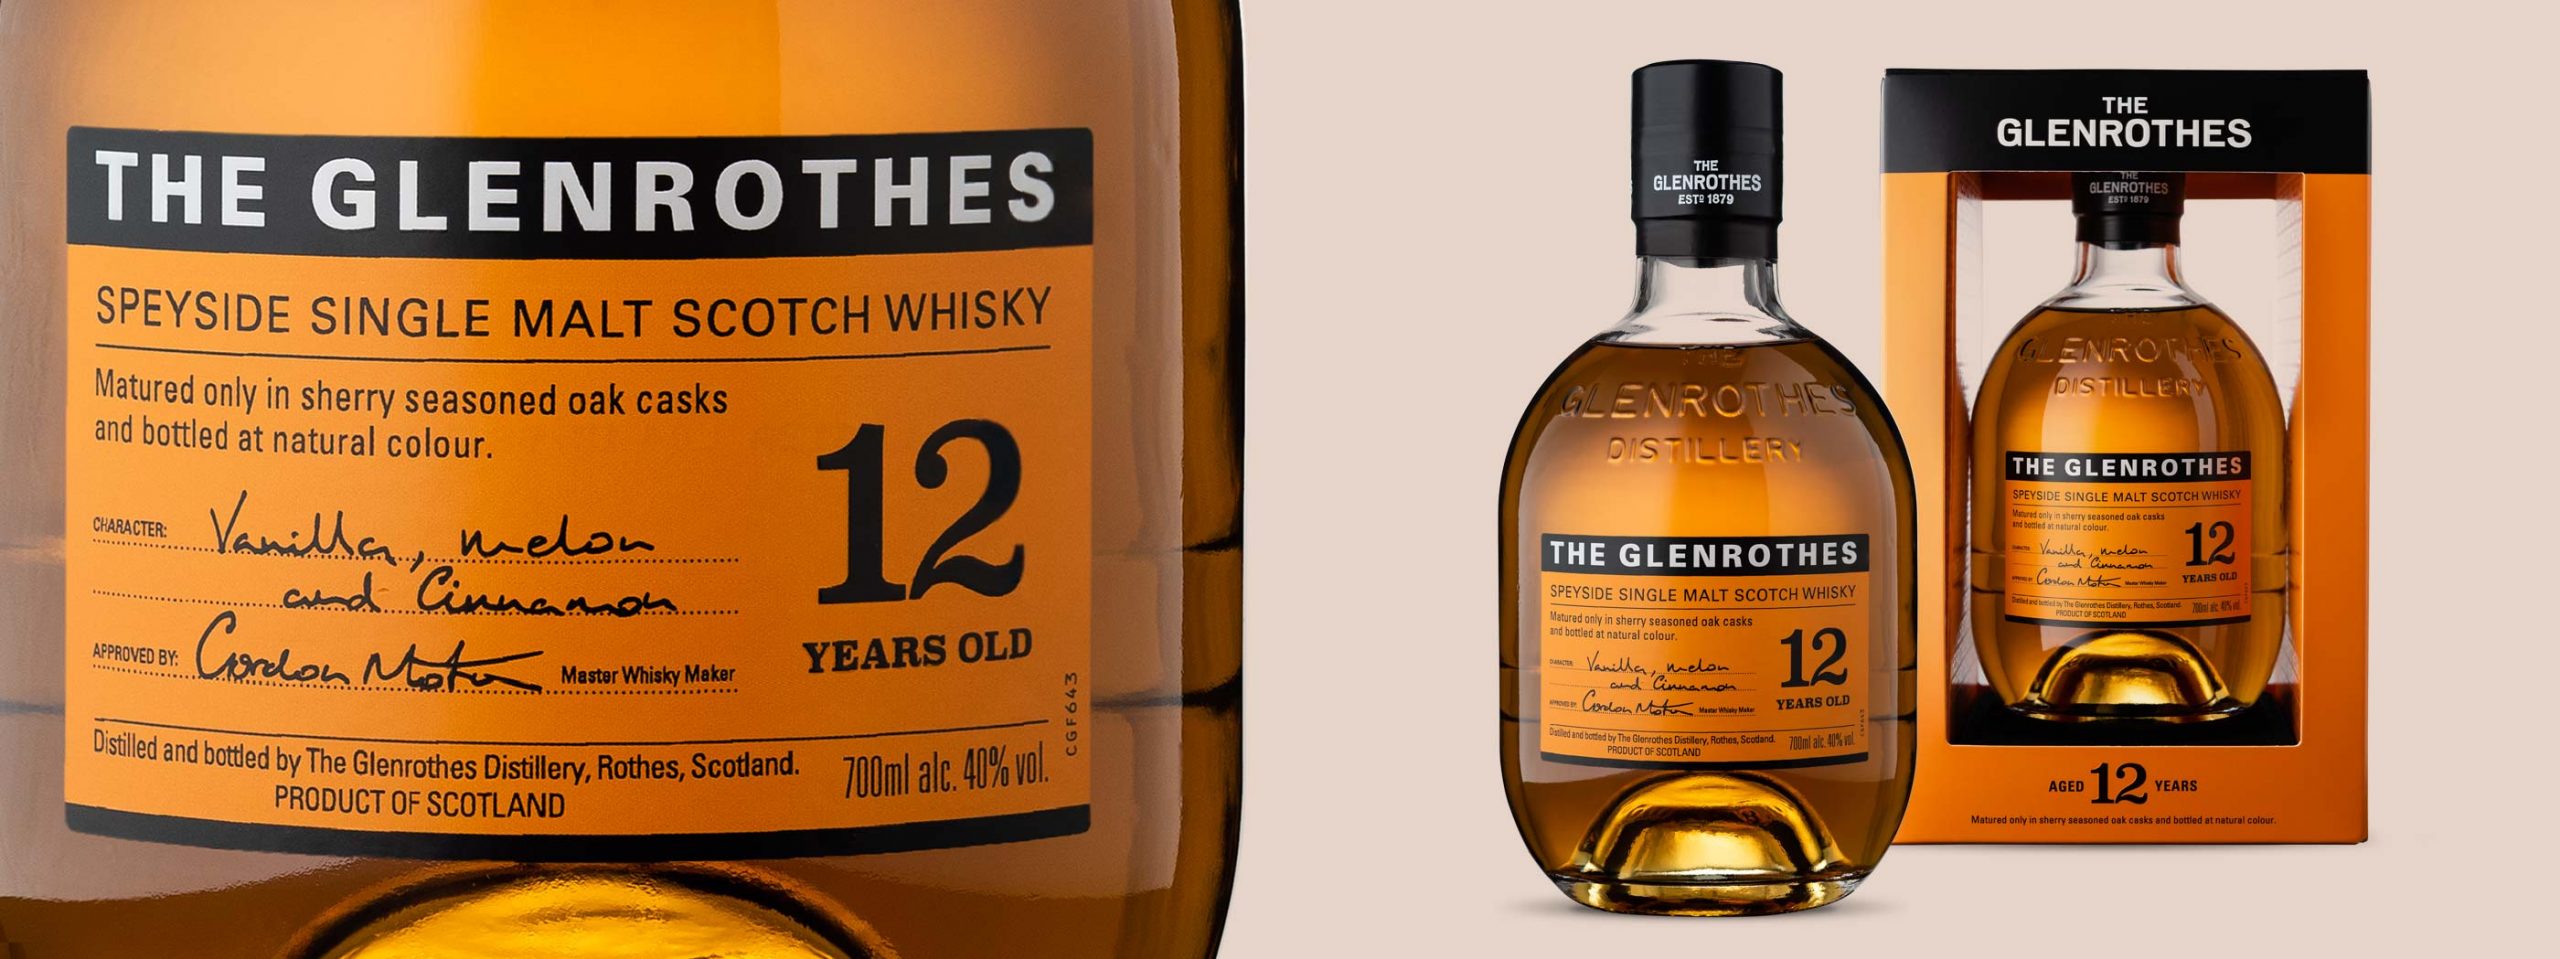 Glenrothes_Packaging_2